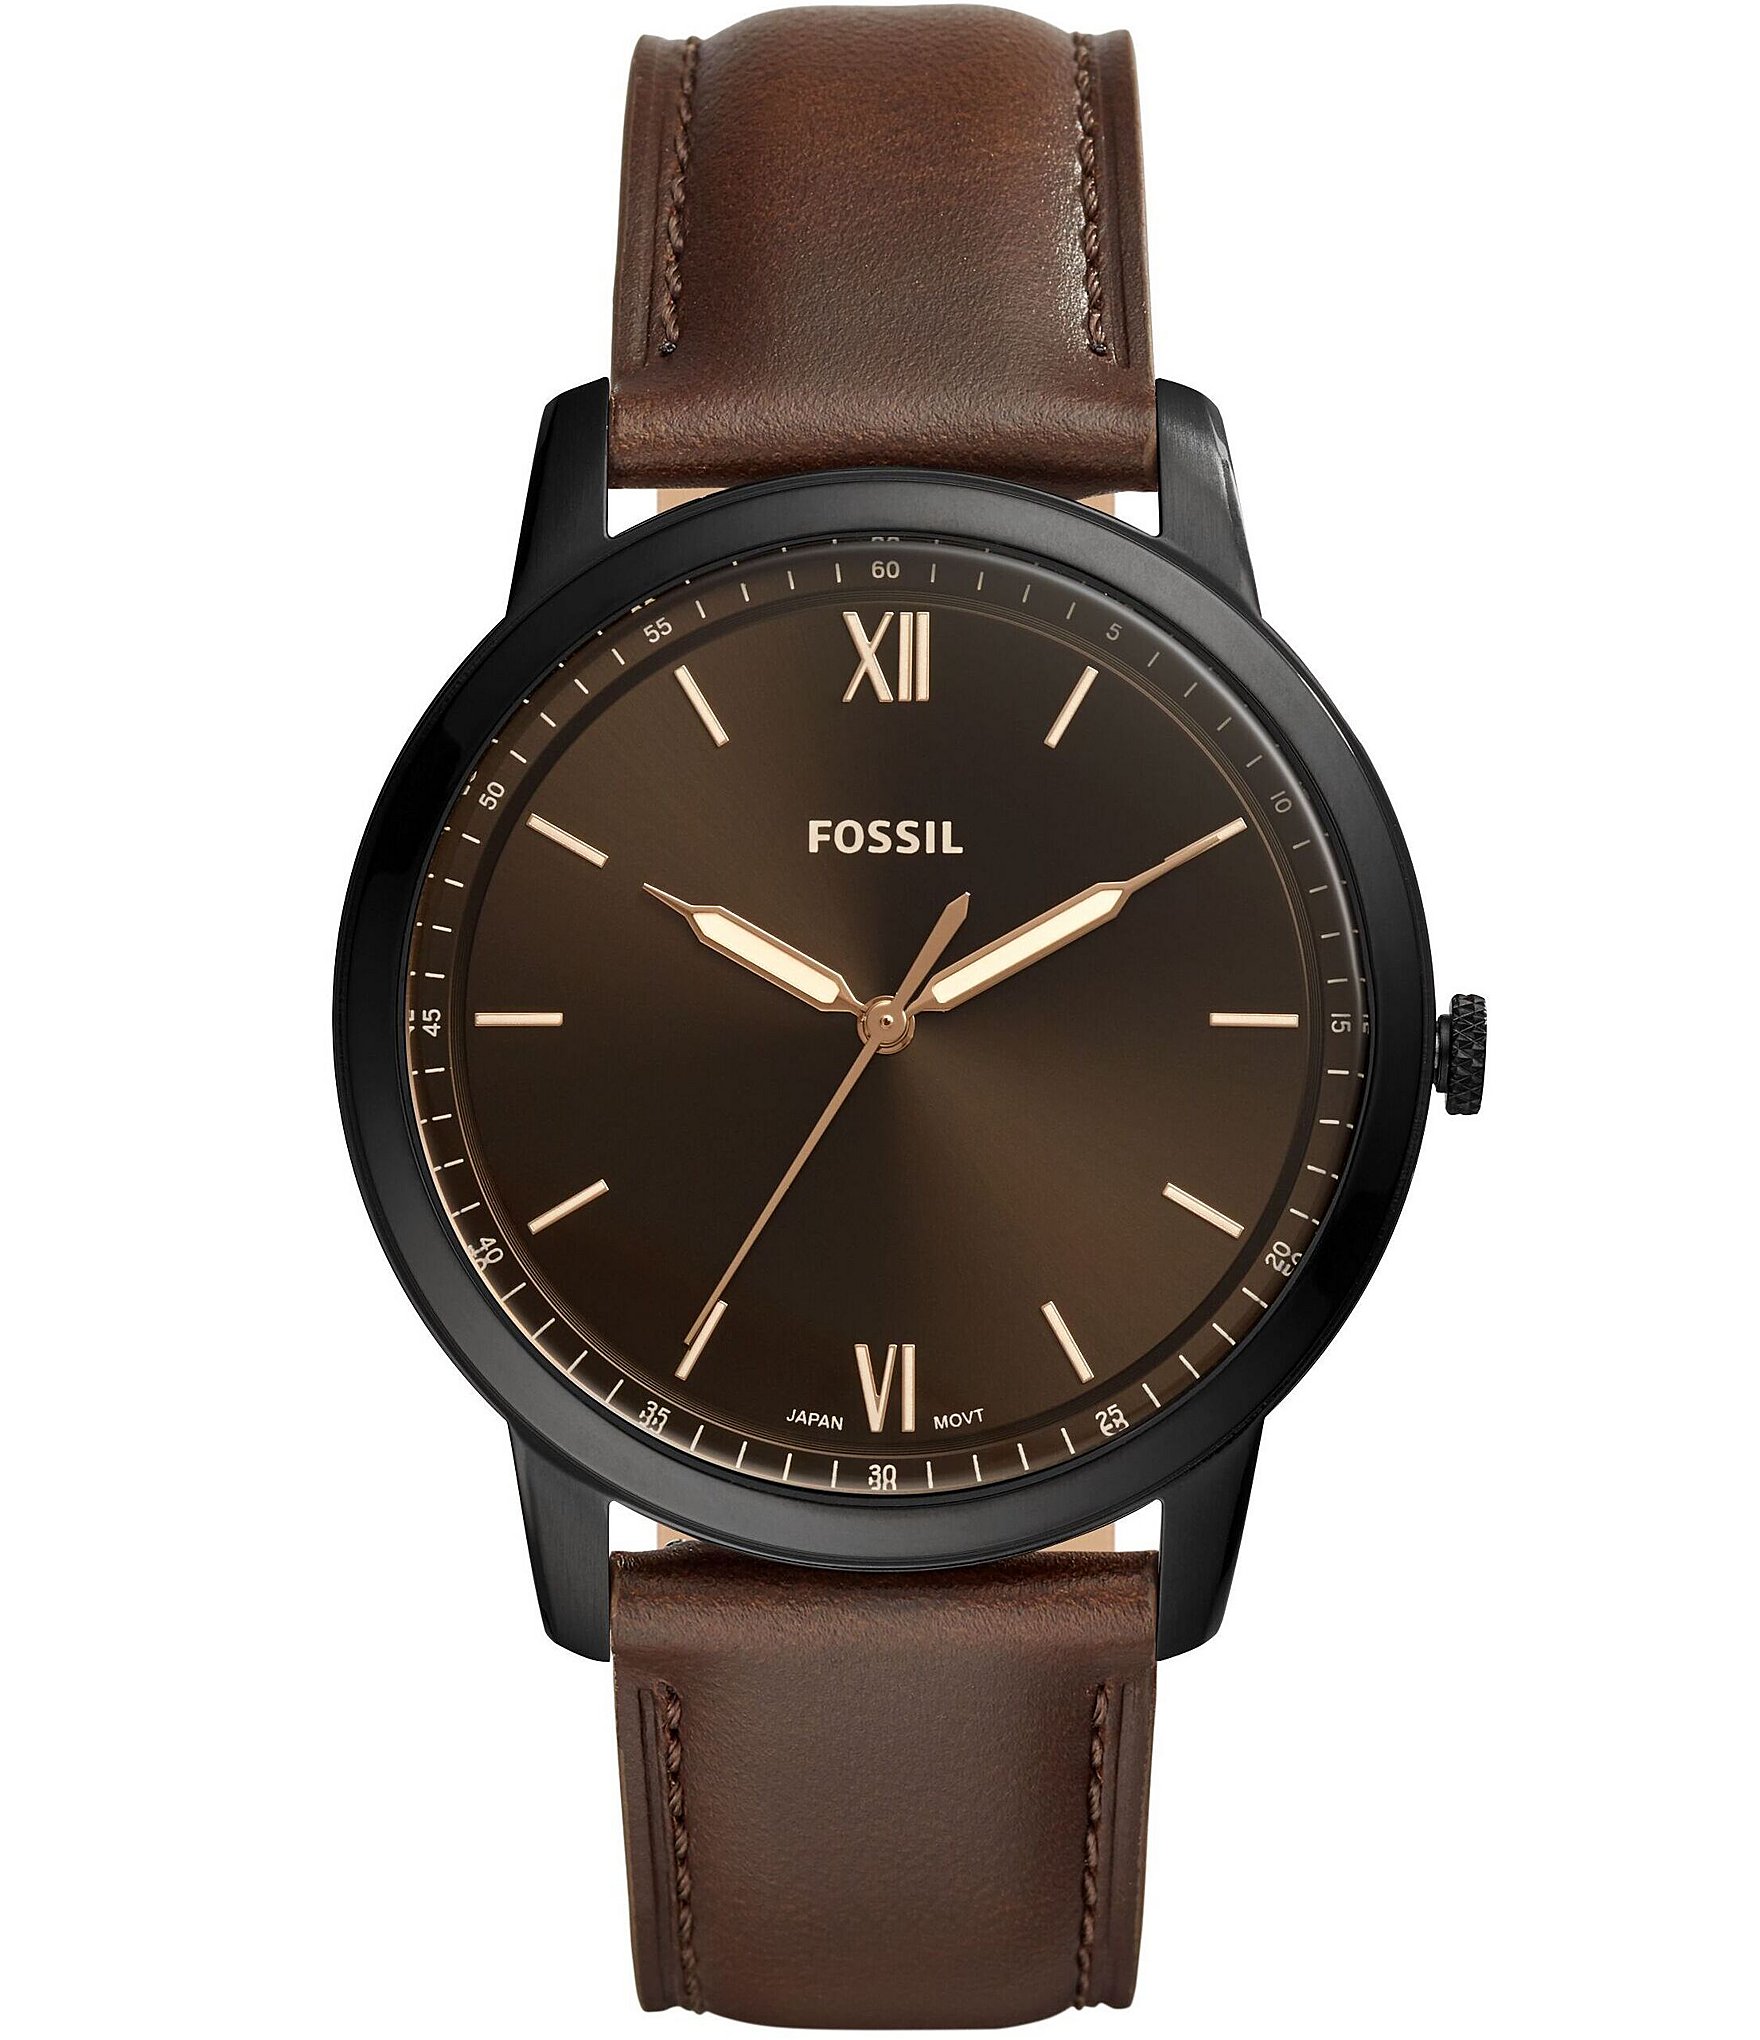 Arriba 63+ imagen fossil brown leather watch - Ecover.mx